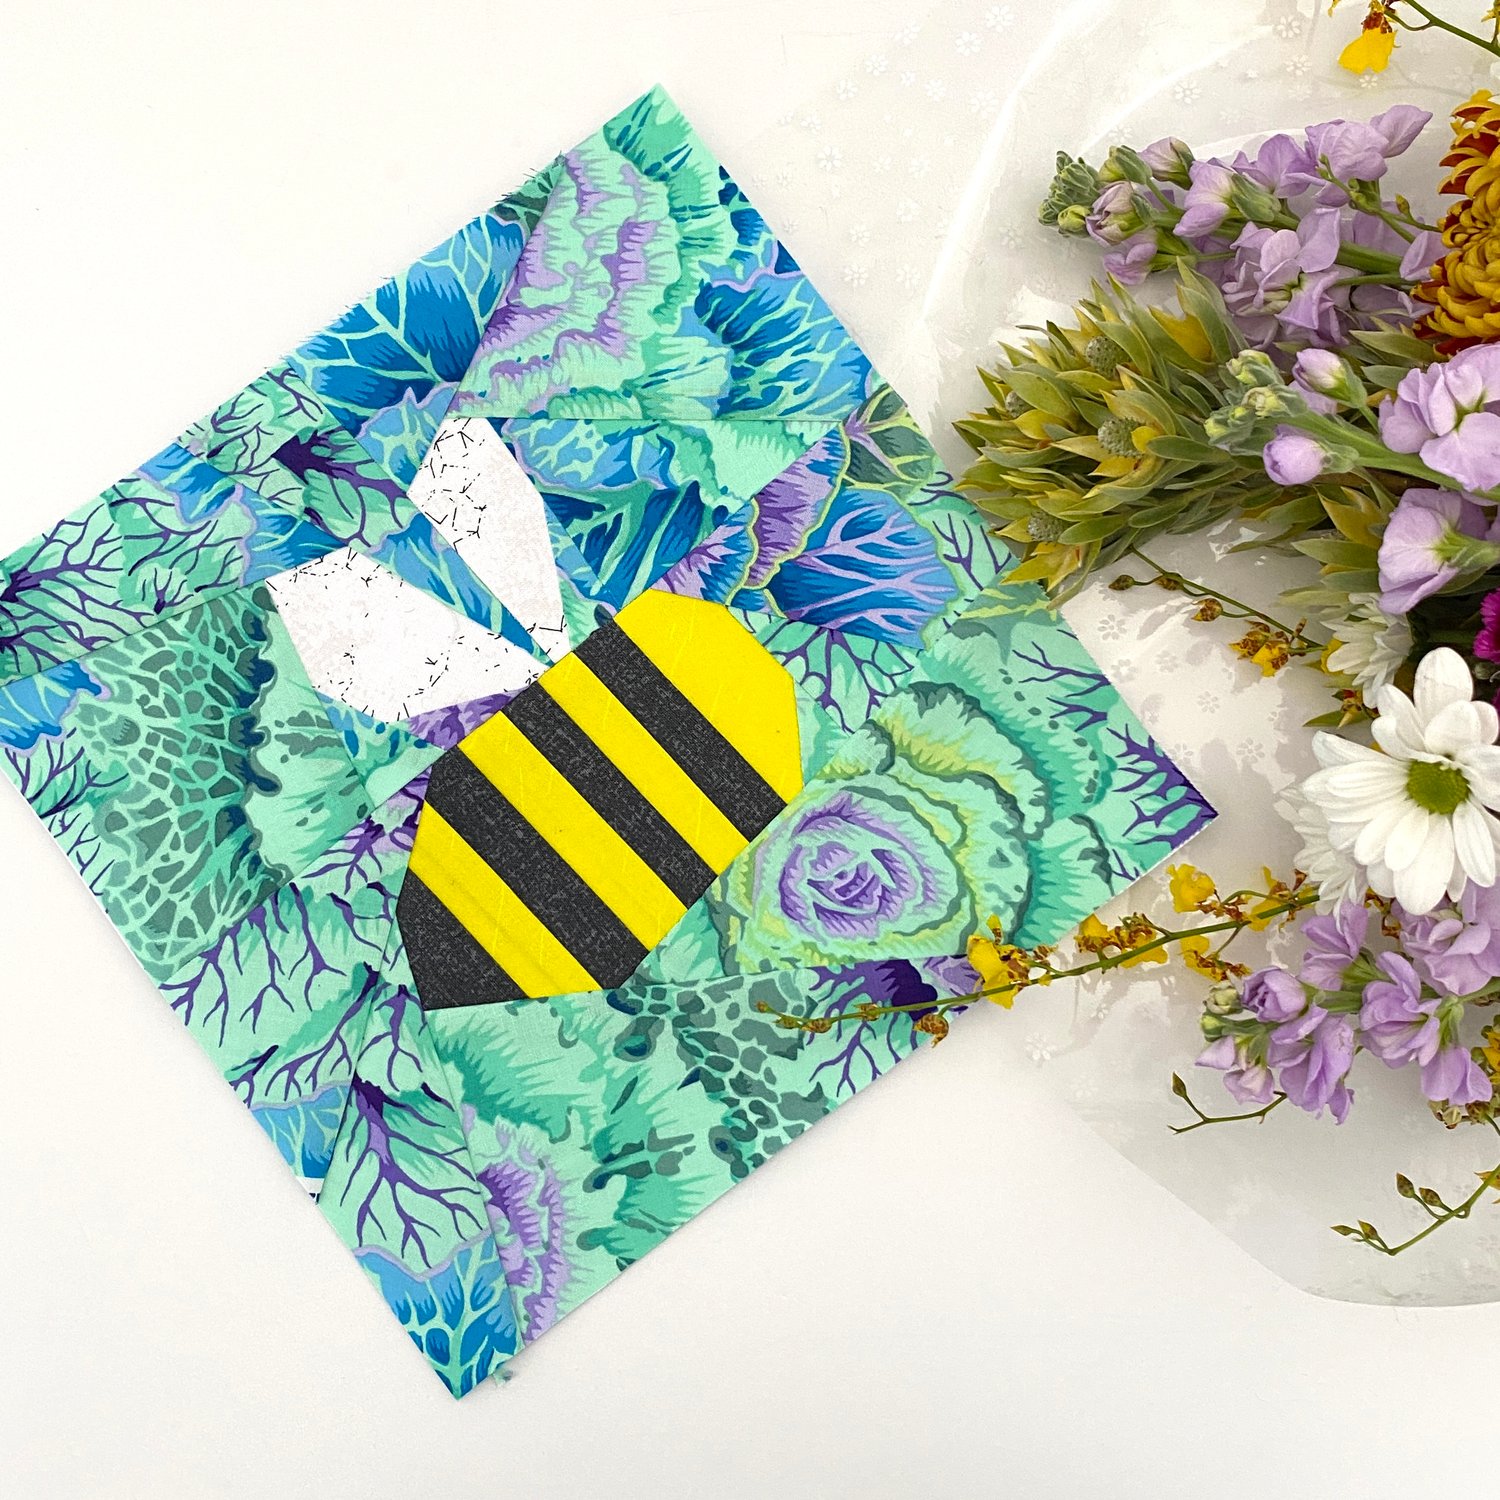 Nine awesome (and totally free) paper pieced quilt patterns that beginners could make! The picture shows the Free Bumble Bee Pattern by Kohatu Patterns